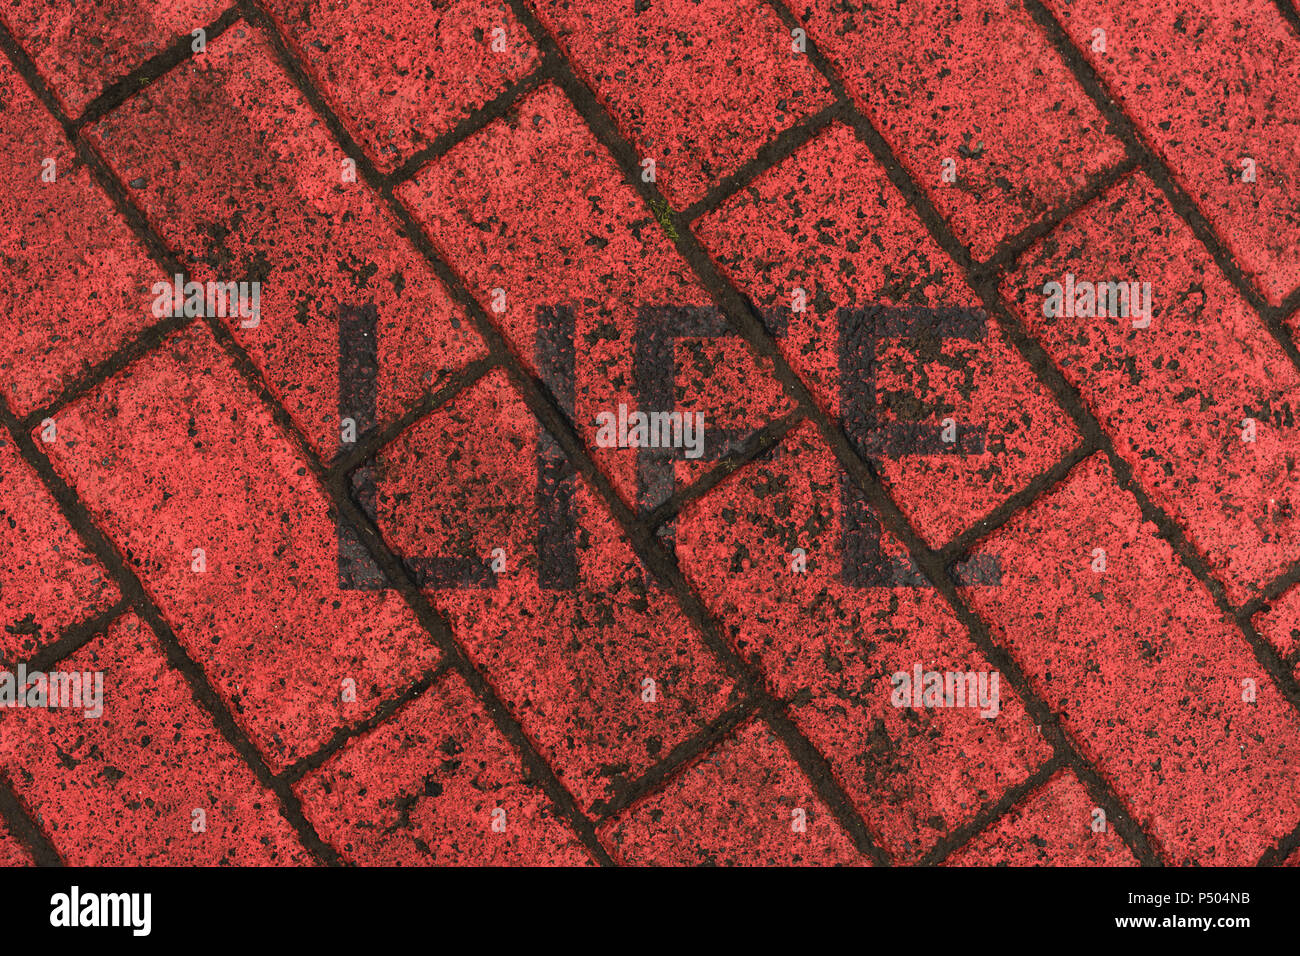 Word 'Life' stenciled on red pavement Stock Photo